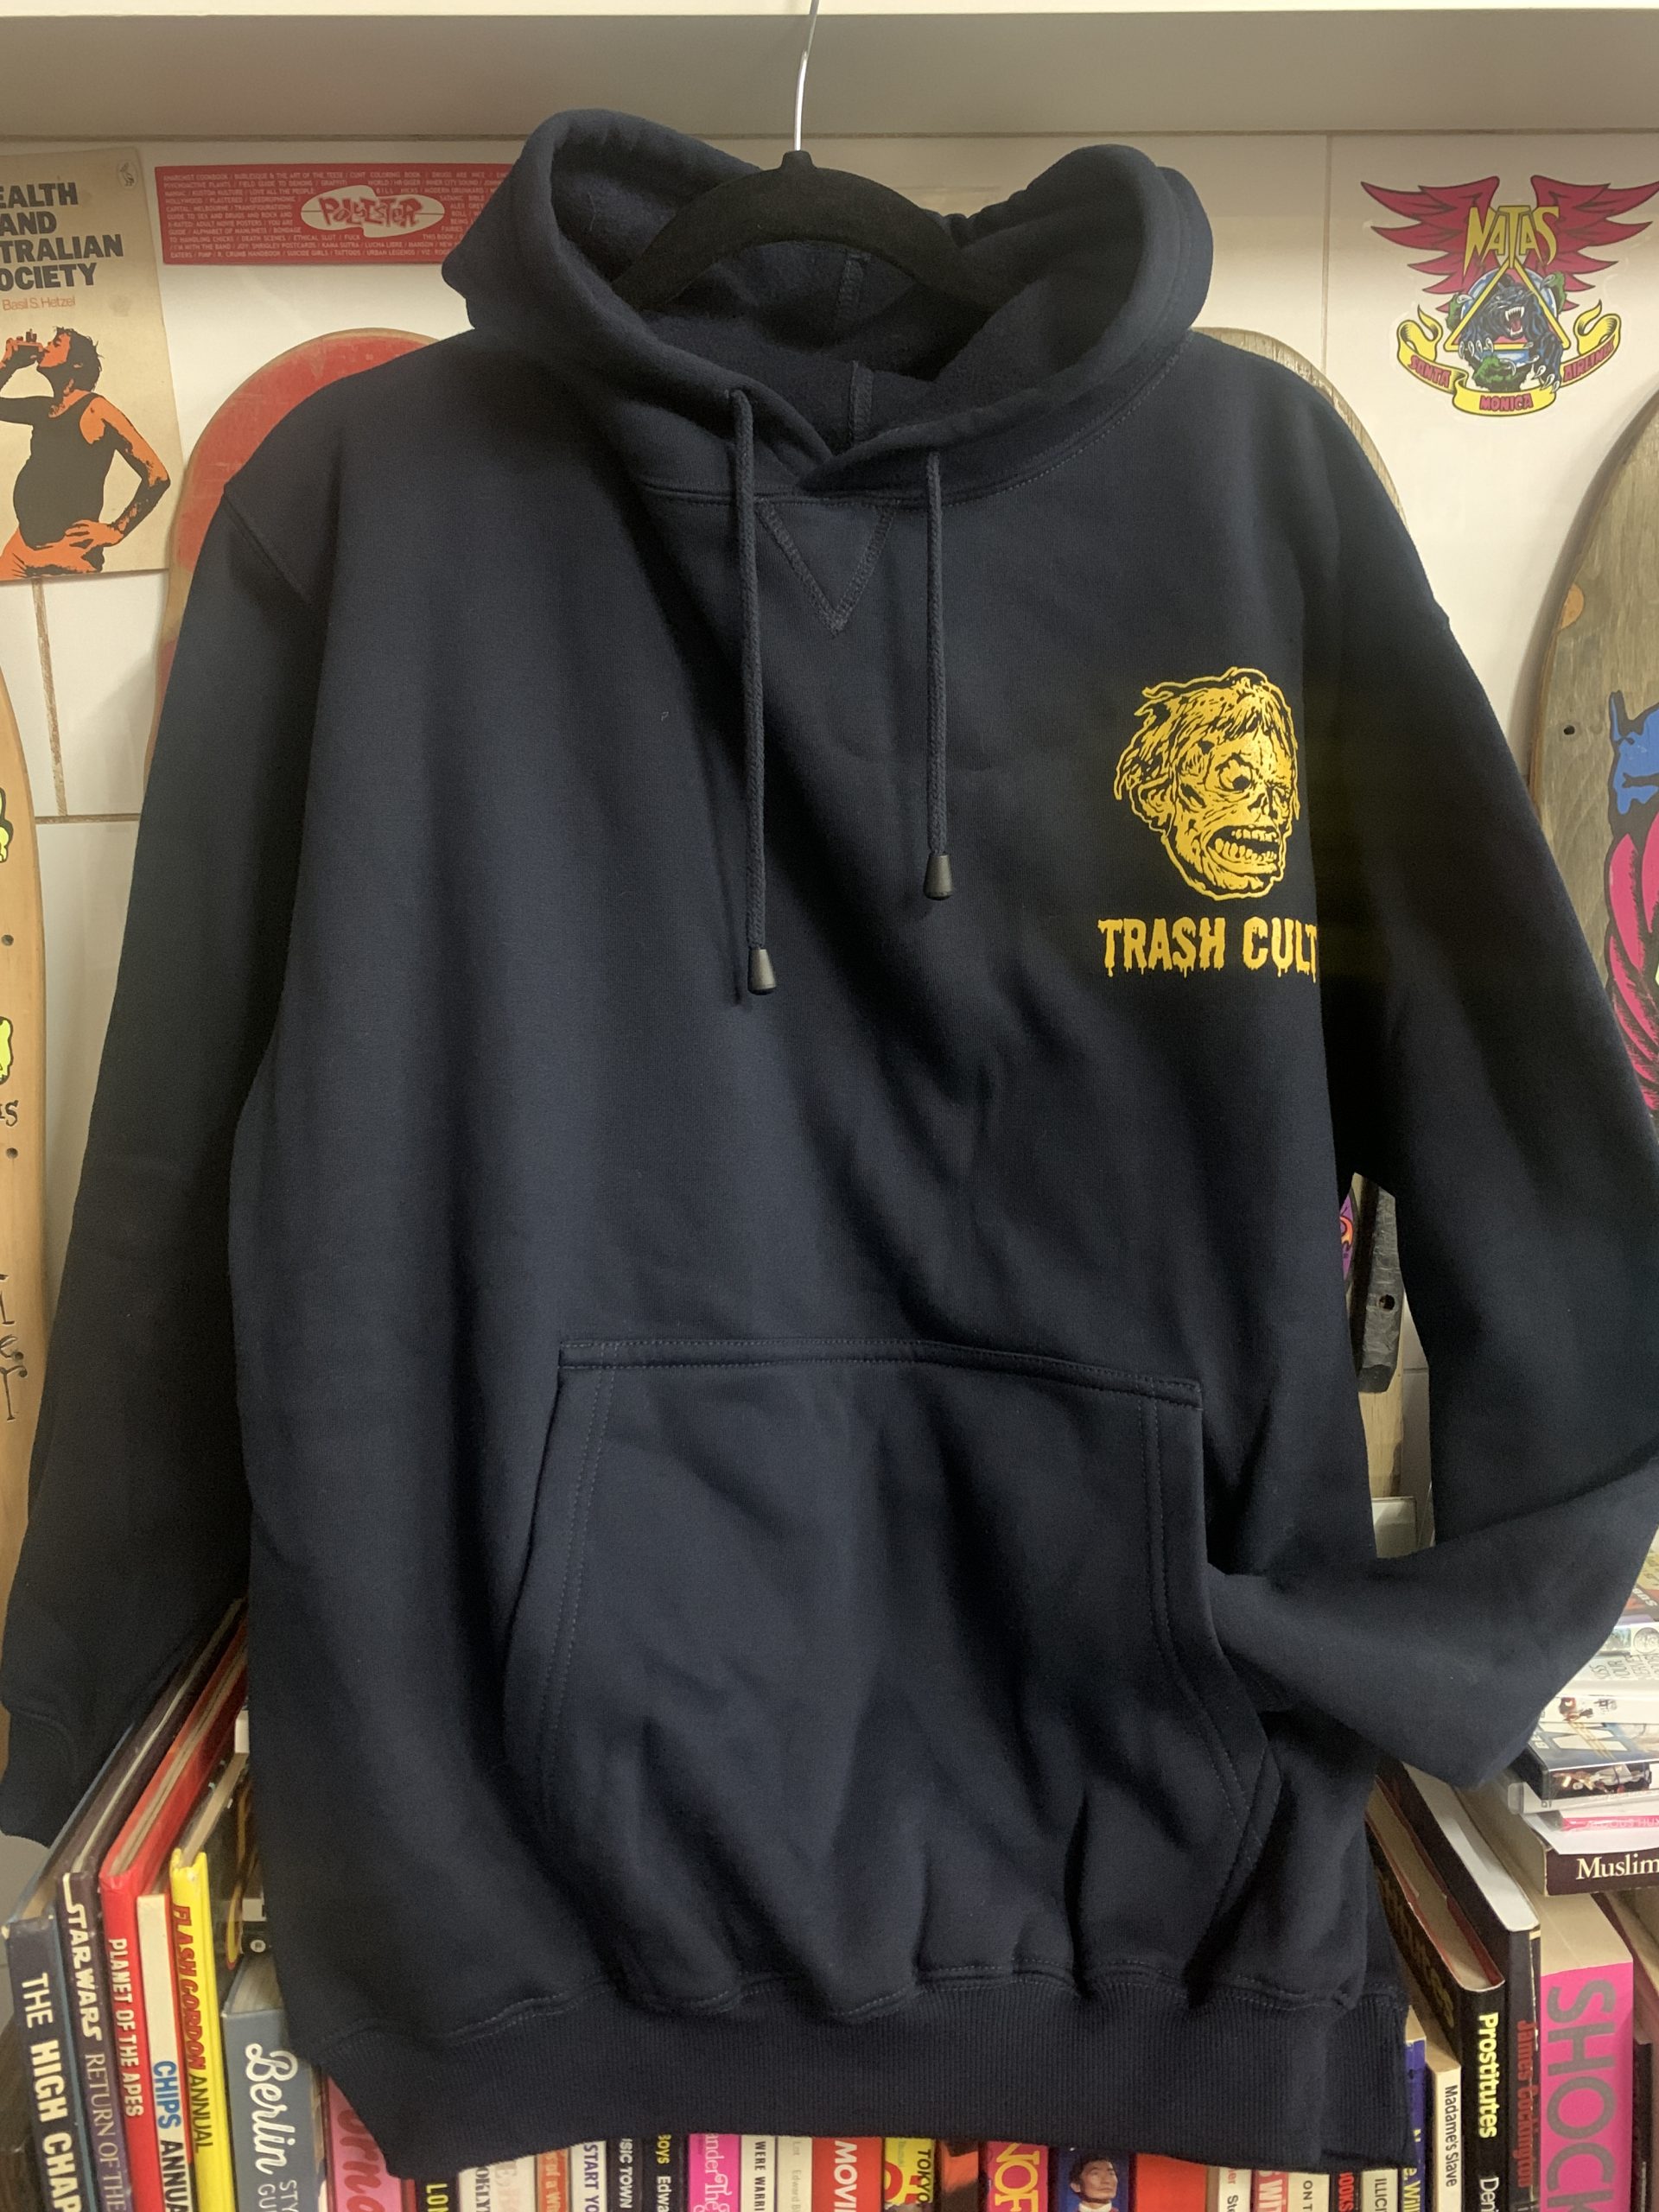 Trash Cult Hoodie - Navy with Yellow - Trash Cult